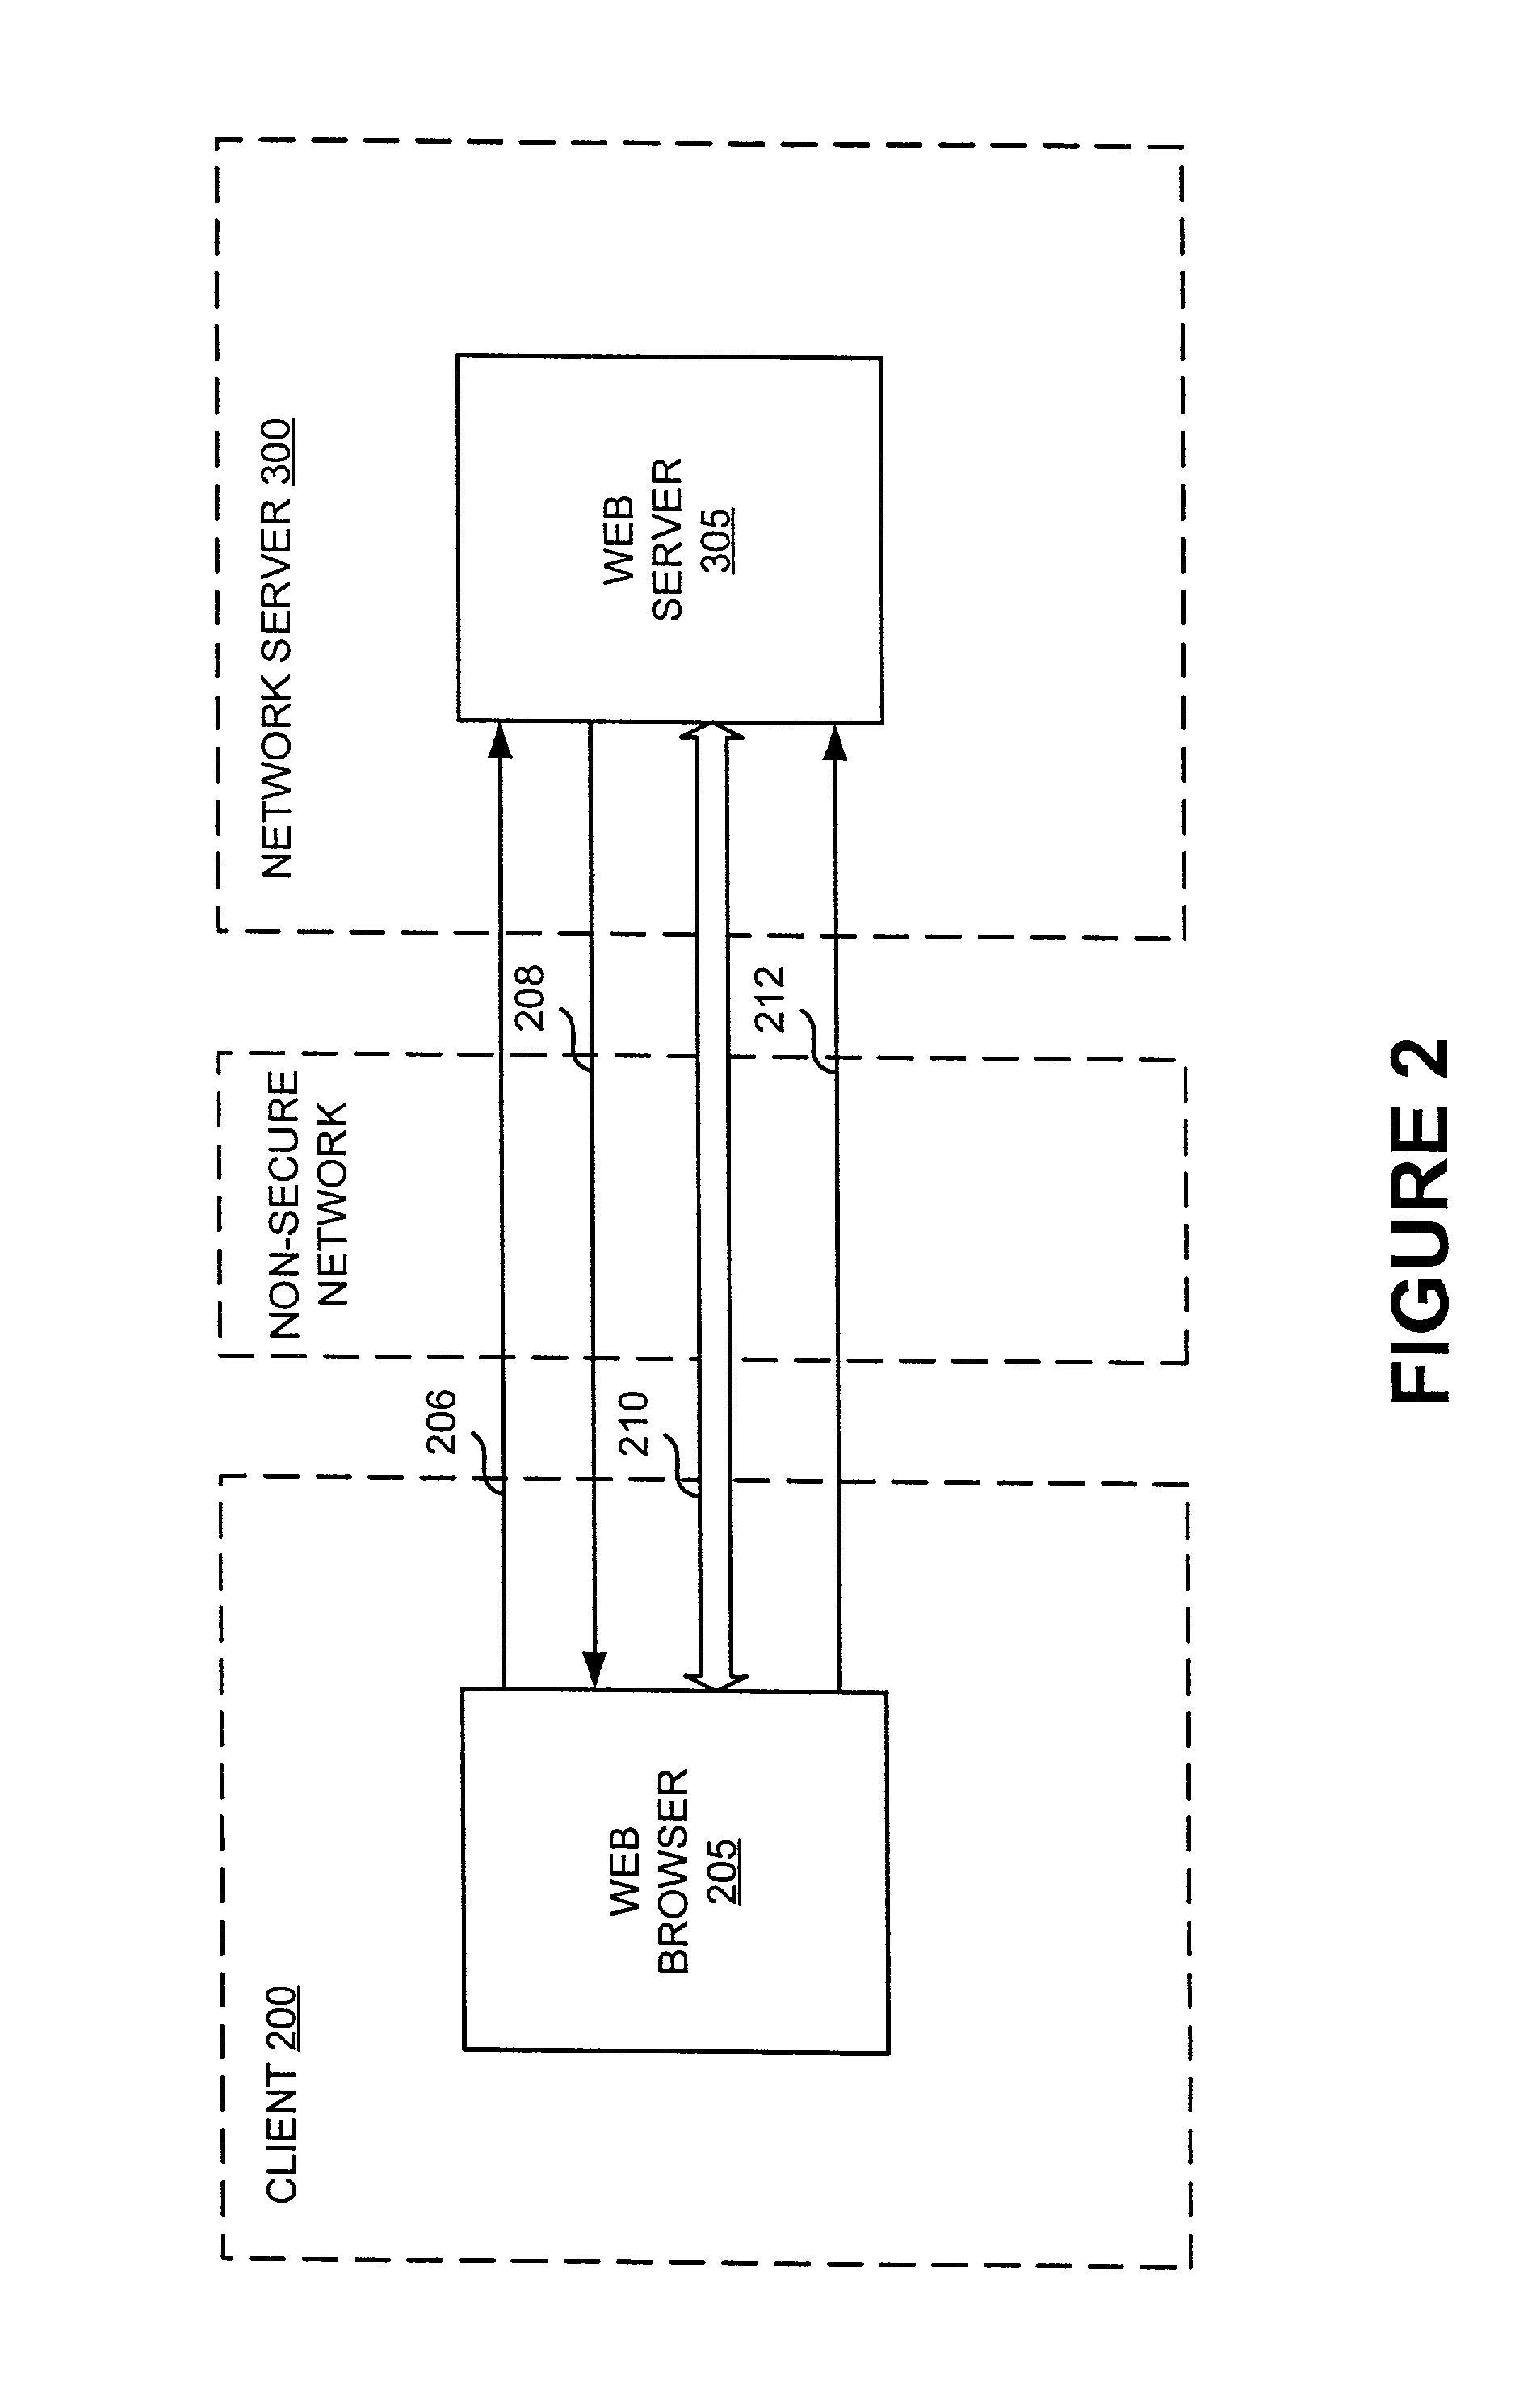 Platform-neutral system and method for providing secure remote operations over an insecure computer network